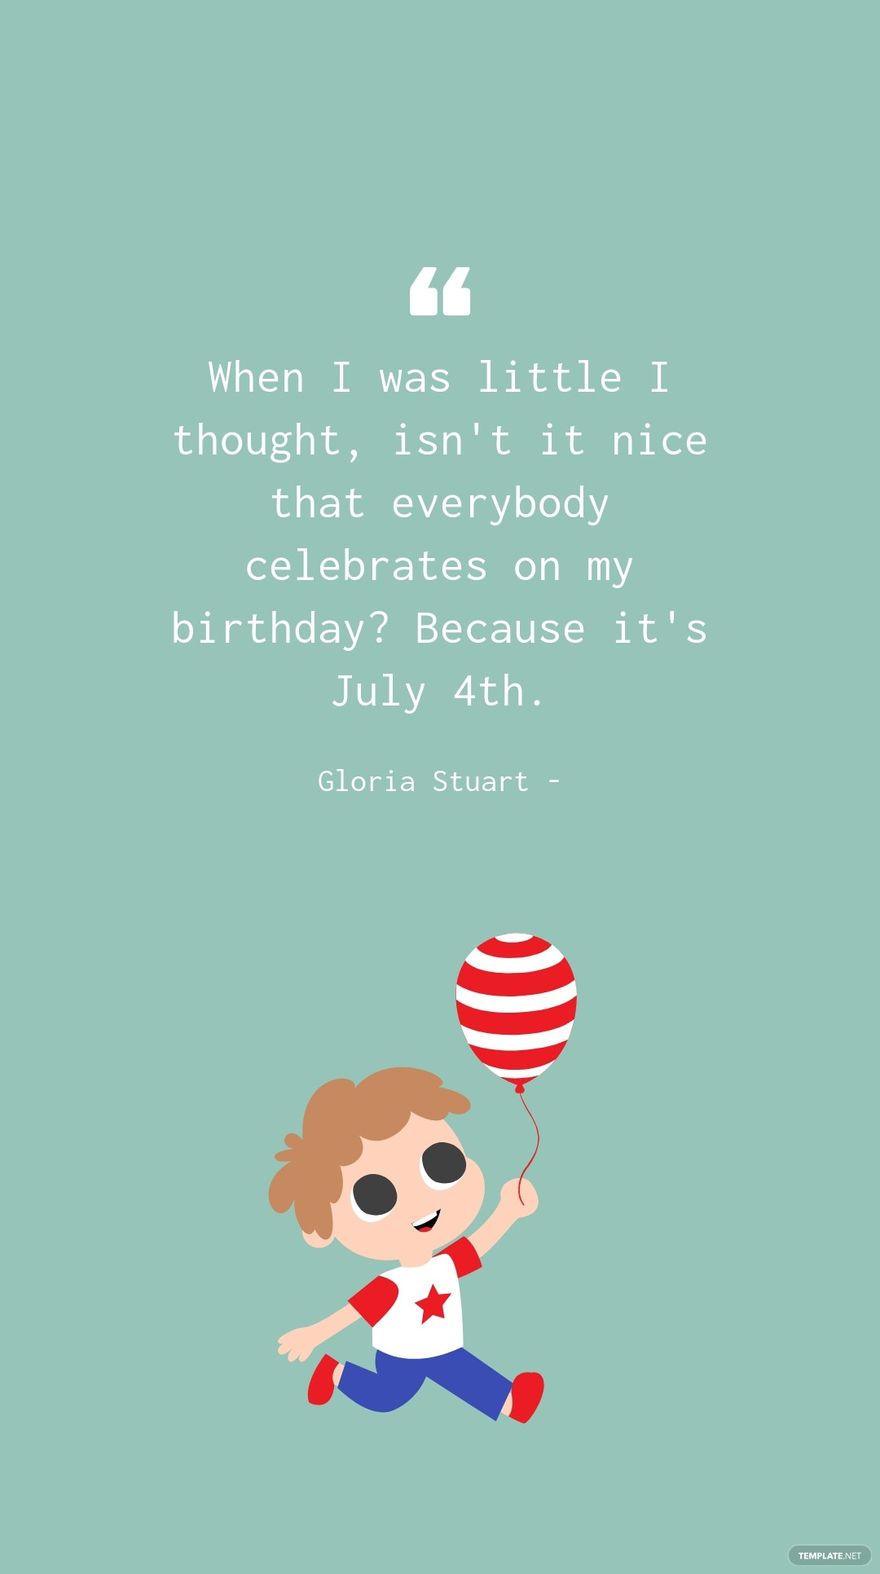 Free Gloria Stuart - When I was little I thought, isn't it nice that everybody celebrates on my birthday? Because it's July 4th.